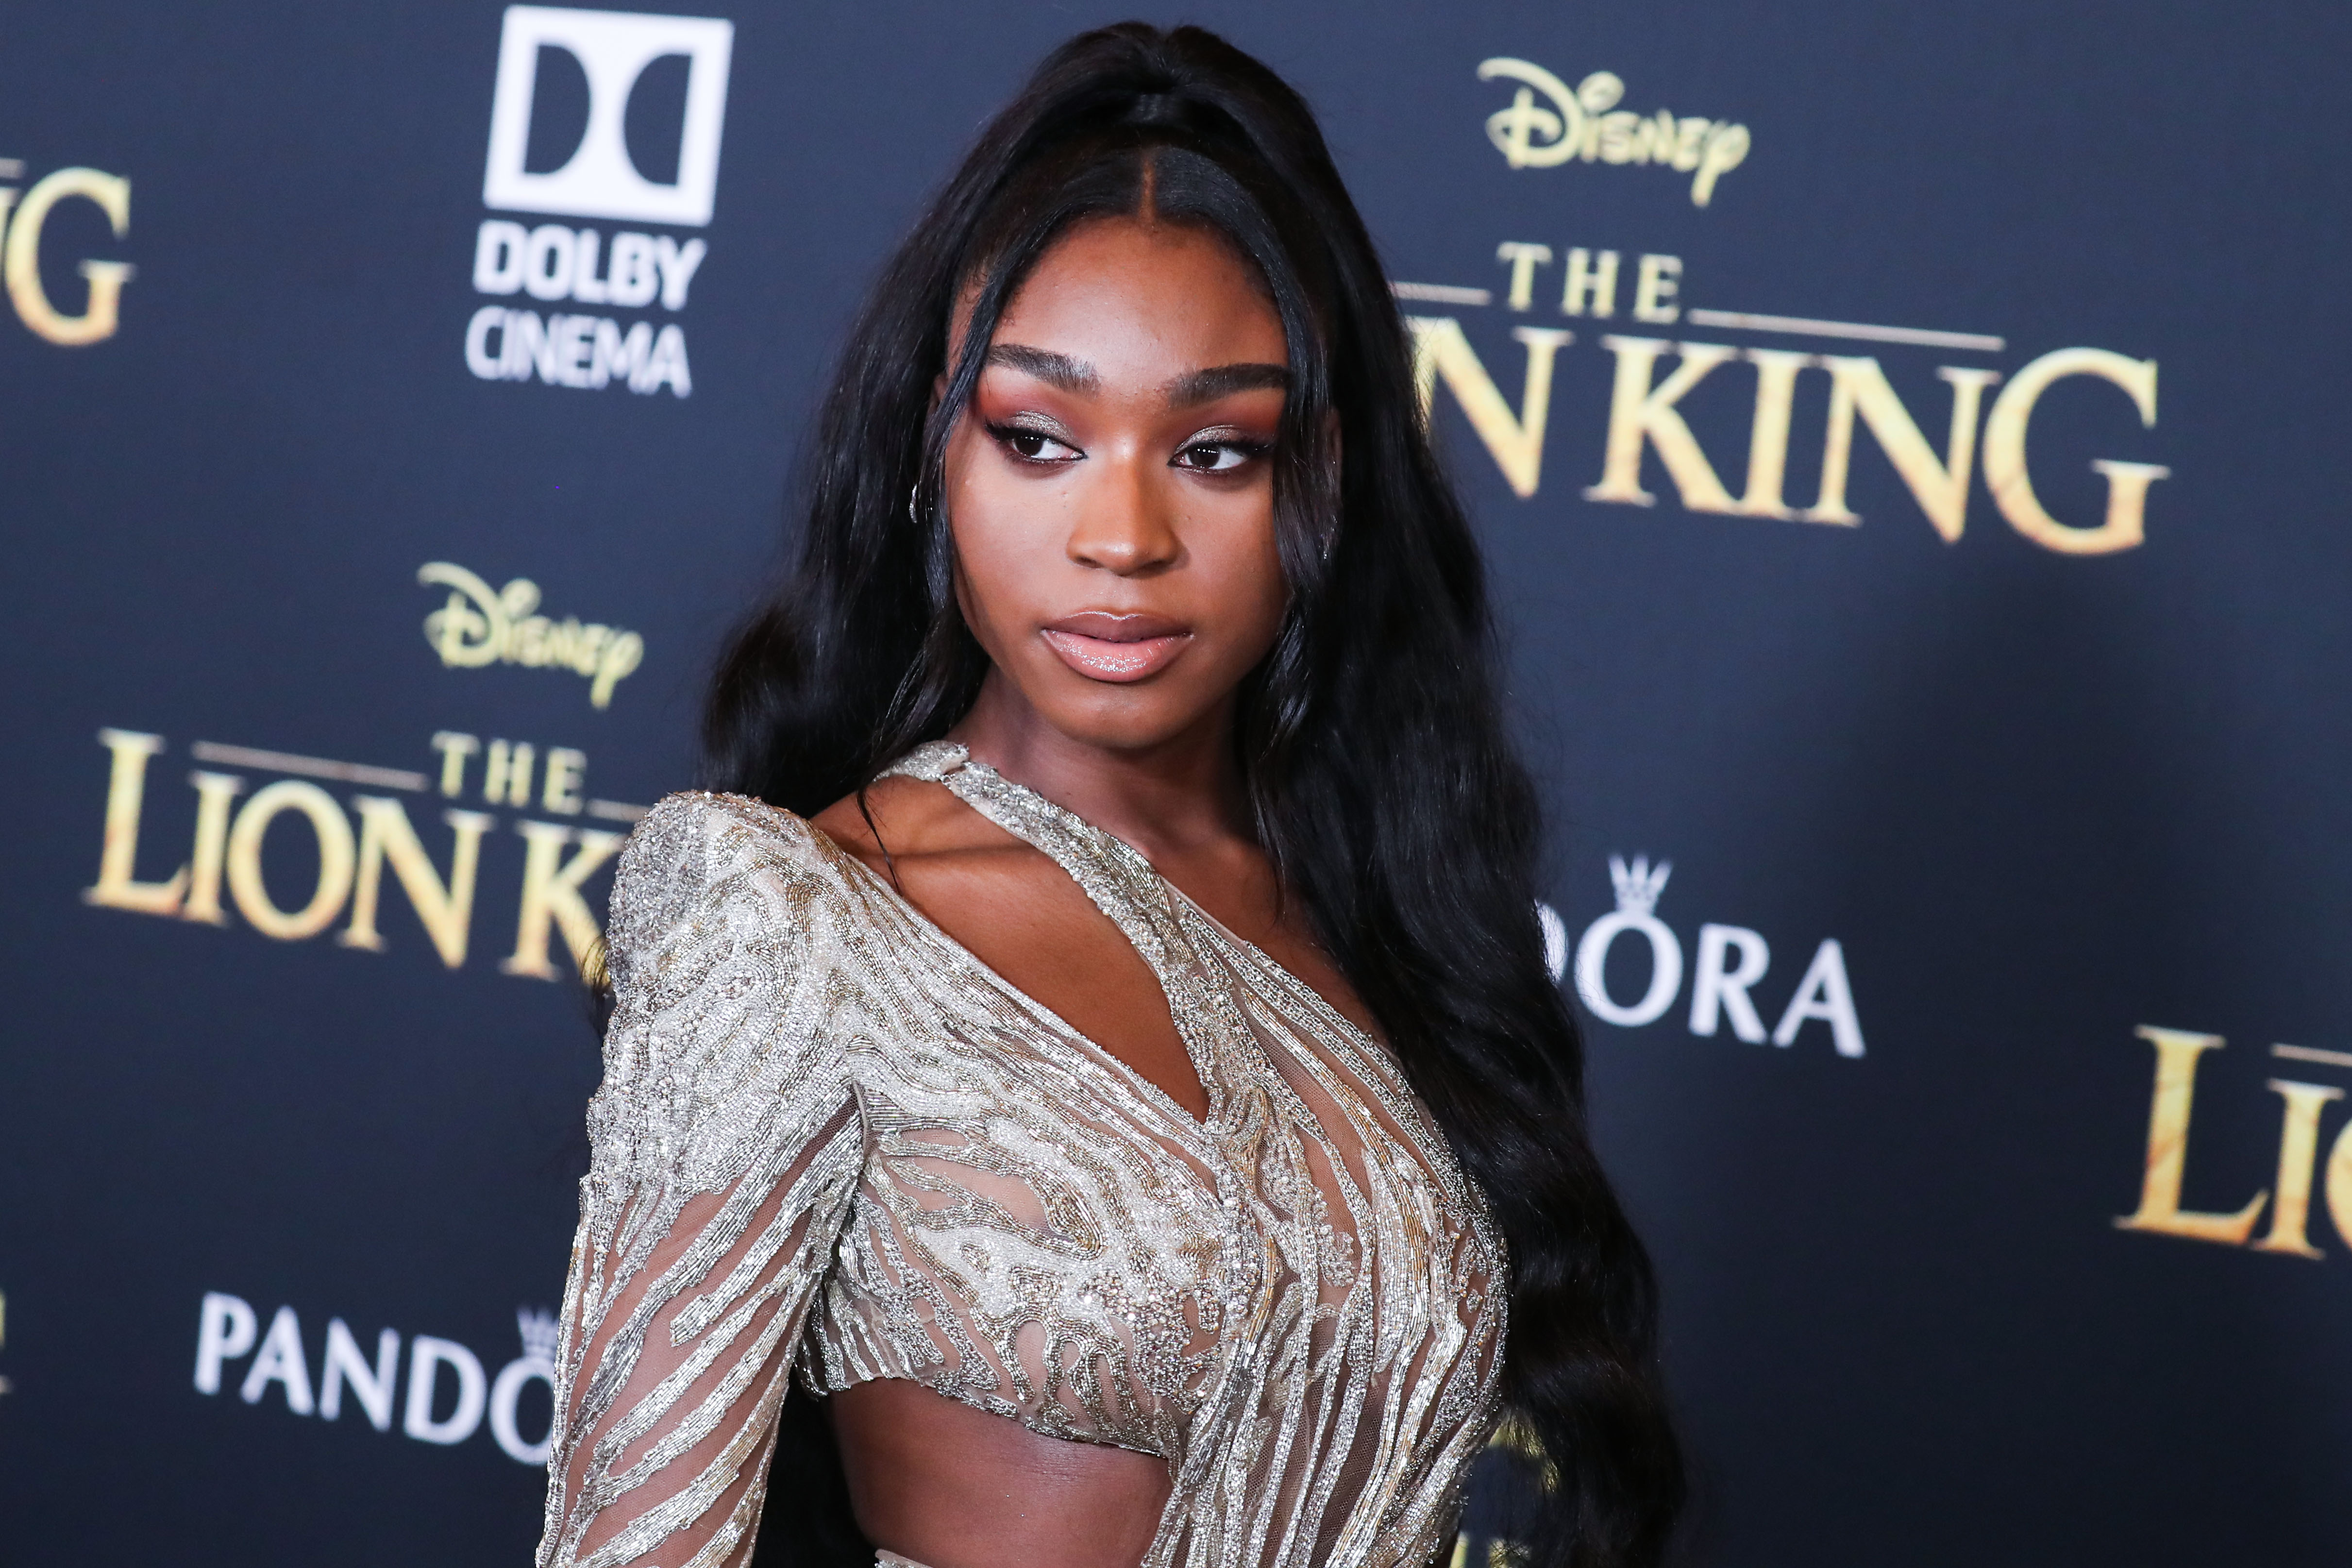 Singer Normani Kordei Hamilton arrives at the World Premiere Of Disney's 'The Lion King' held at the Dolby Theatre on July 9, 2019 in Hollywood, Los Angeles, California, United States. (Photo by Xavier Collin/Image Press Agency)